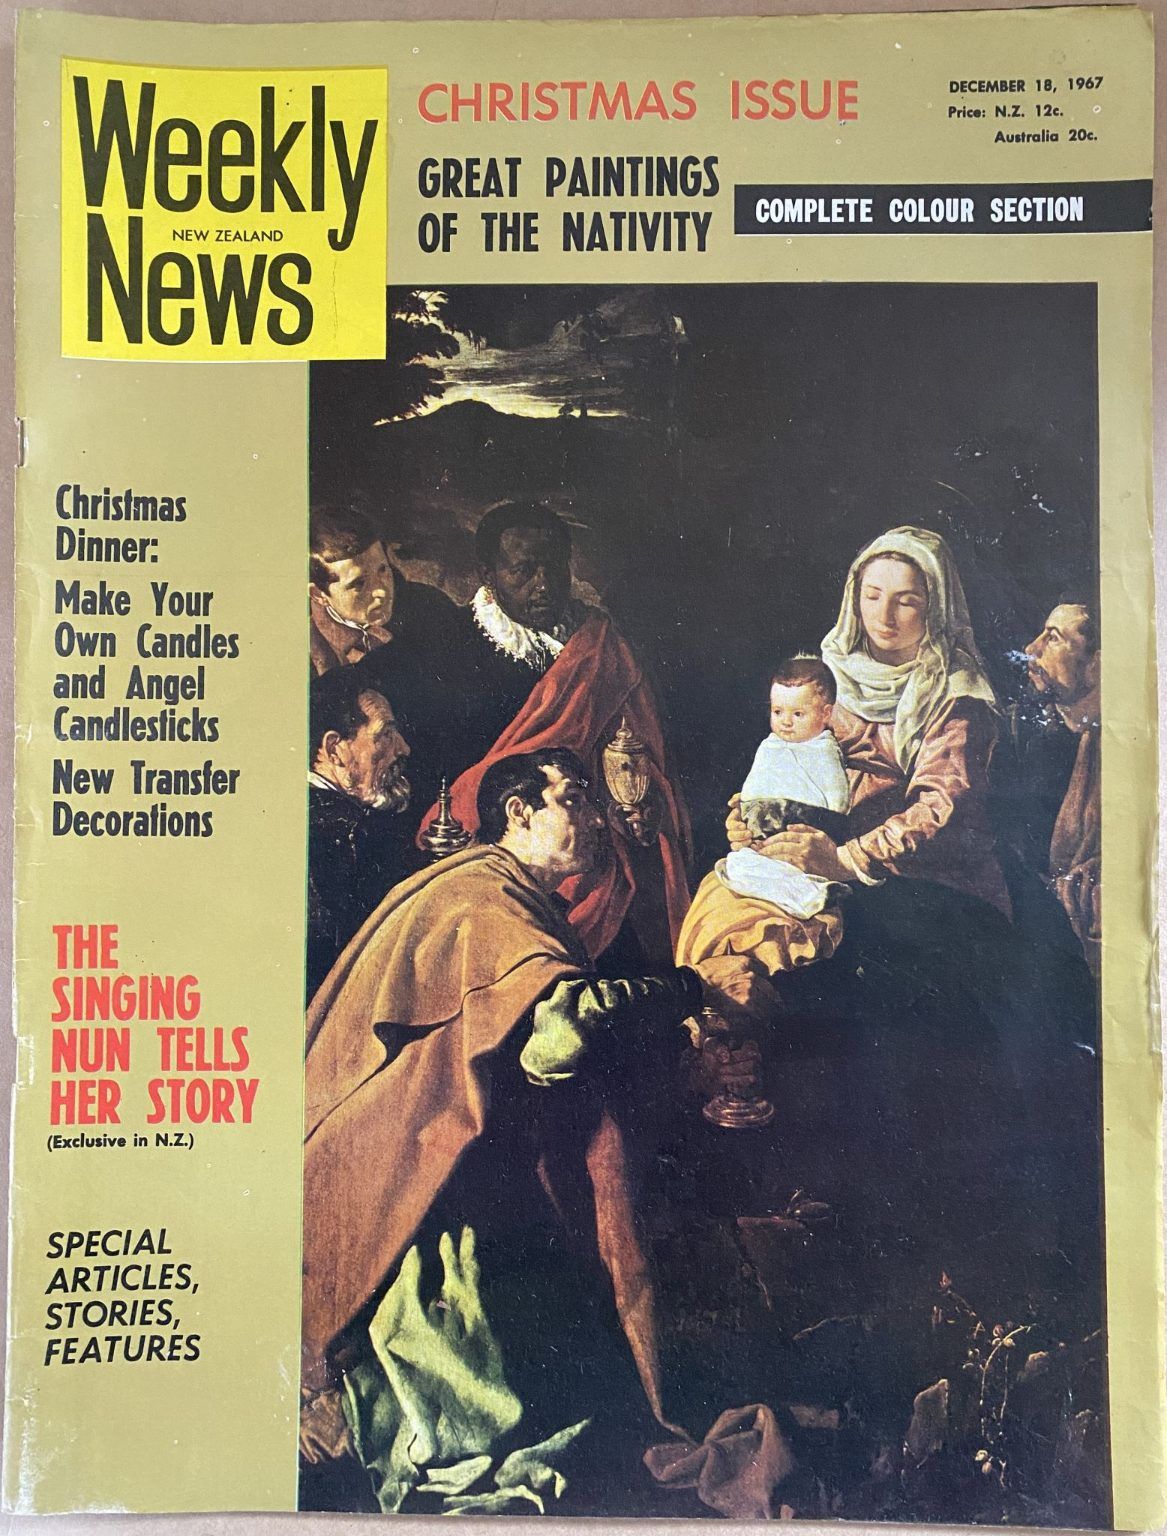 OLD NEWSPAPER: New Zealand Weekly News, No. 5429, 18 December 1967